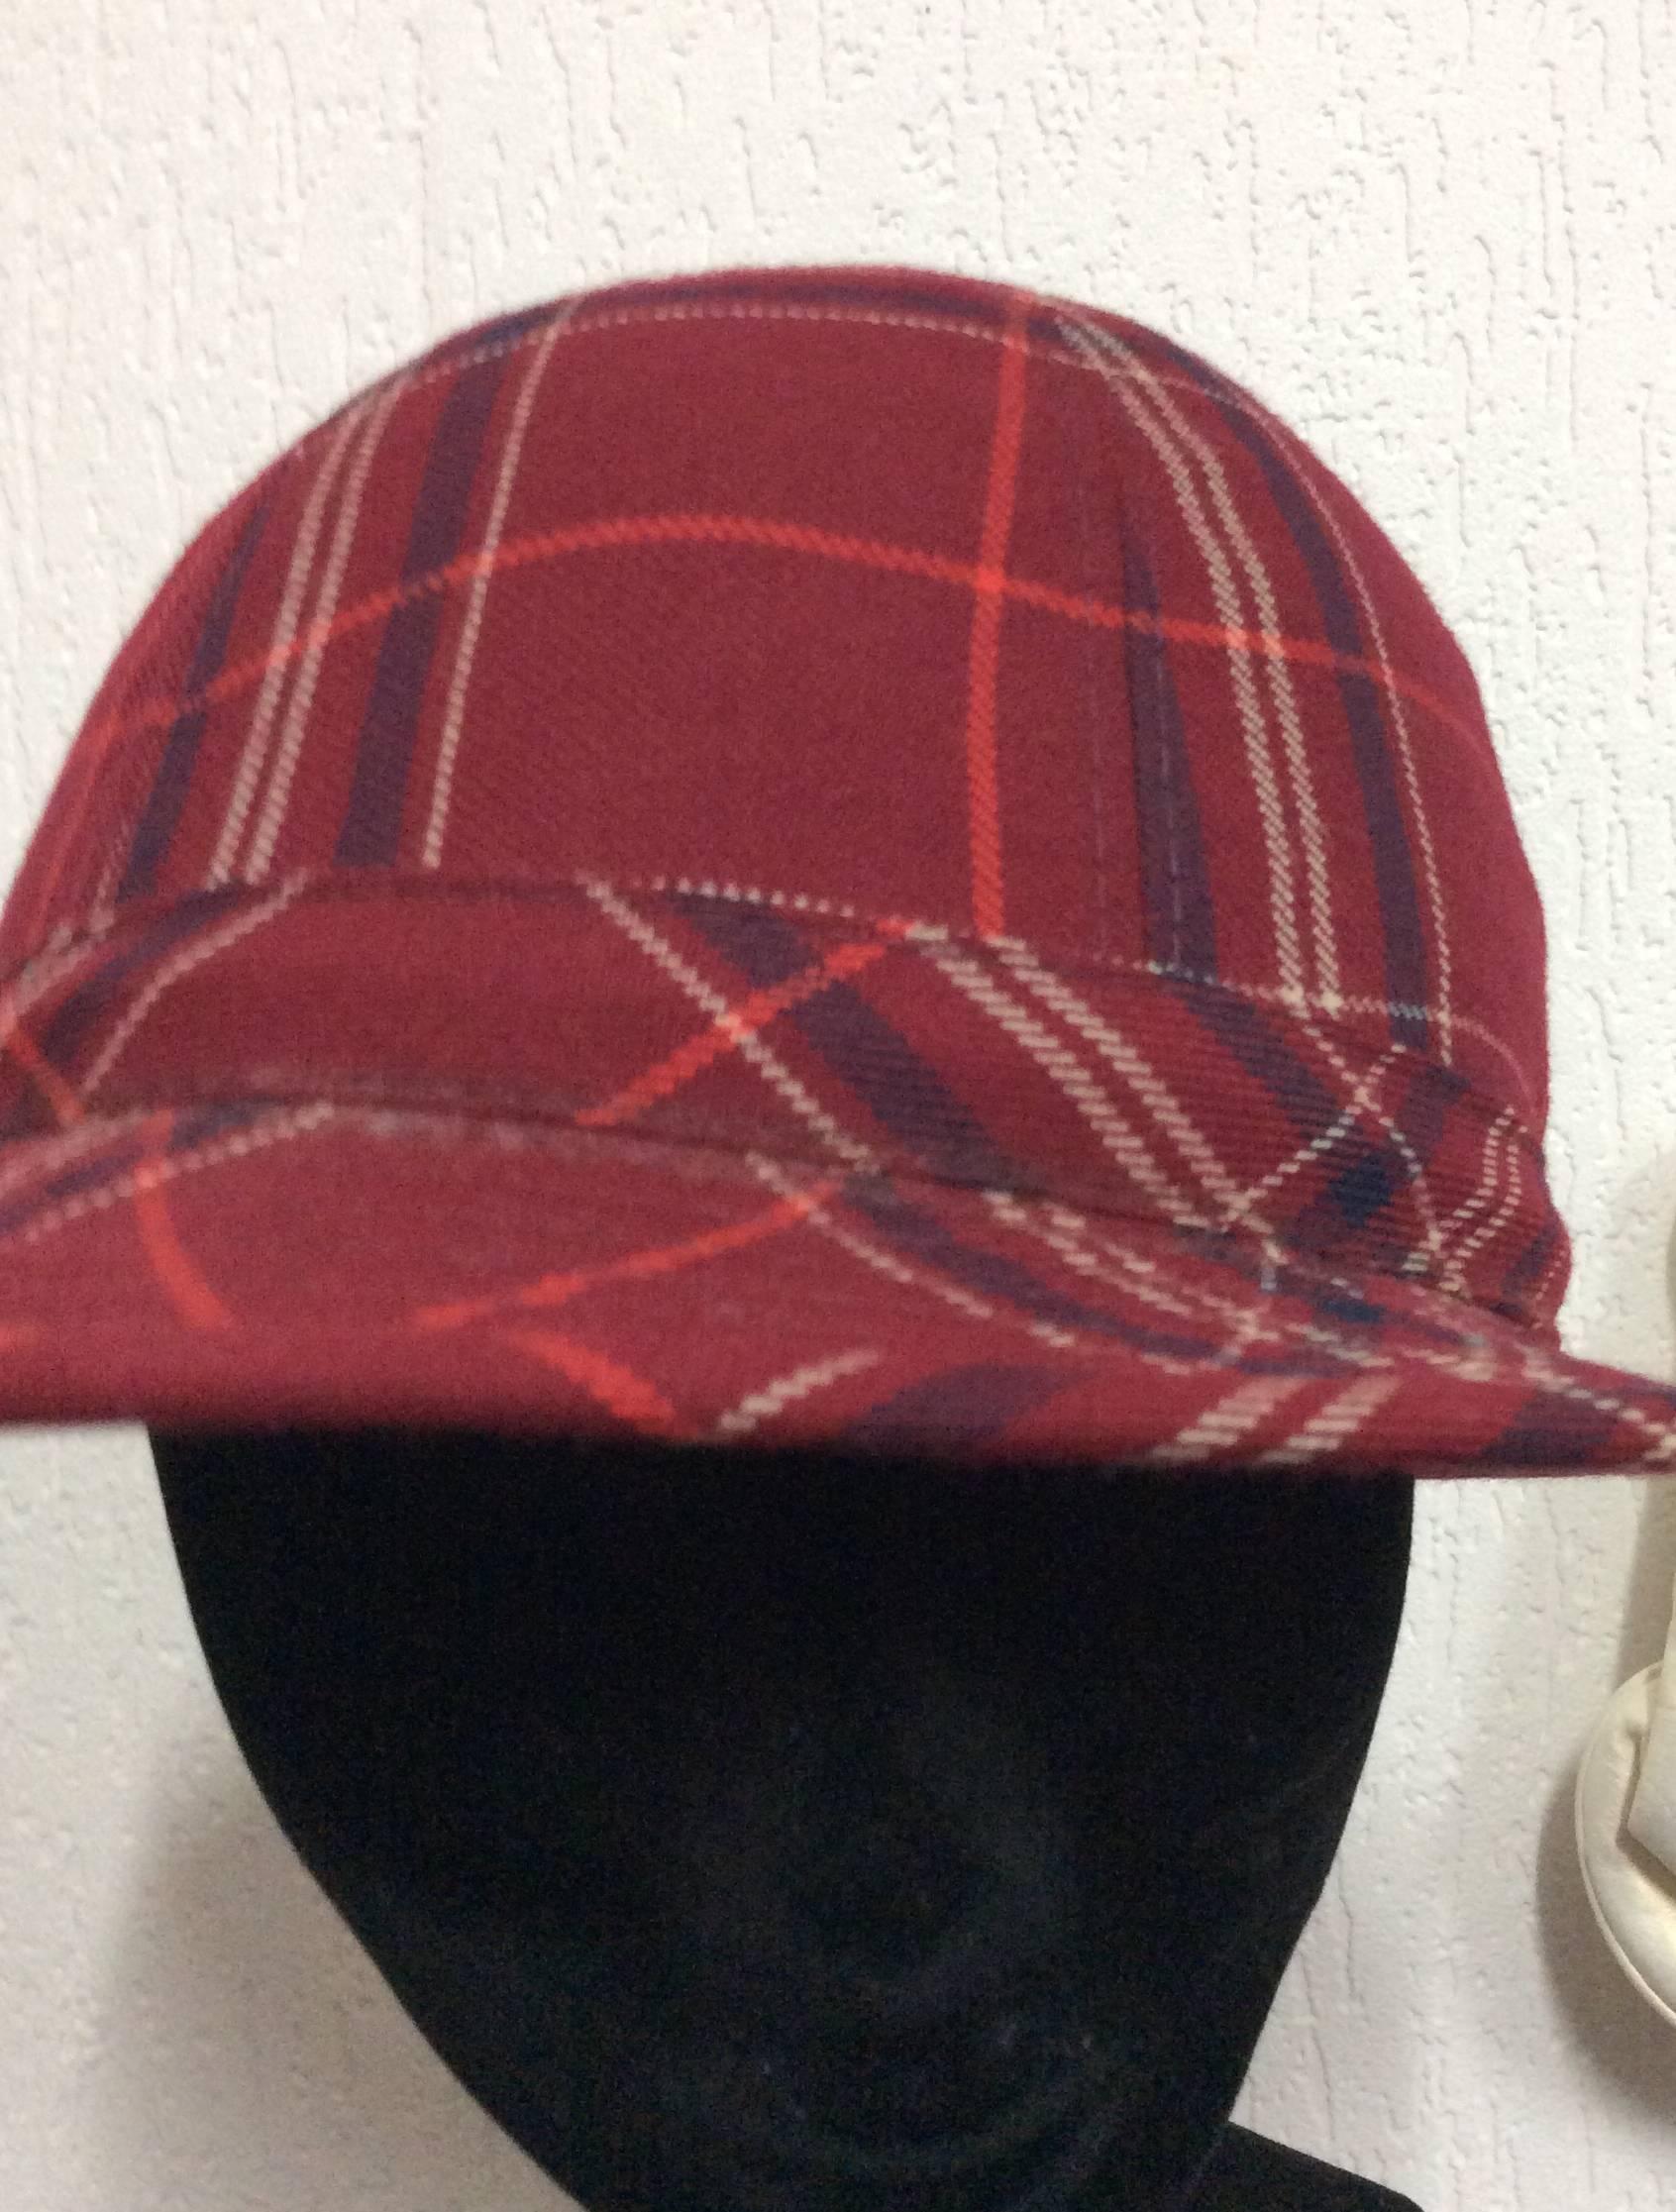 This adorable 1970's plaid hat has an inner circumference of 21 inches. The brim of the hat measures 1.75 inches. It is in excellent condition. The beautiful wool plaid has a combination of red, blue, white, and orange stripes. 